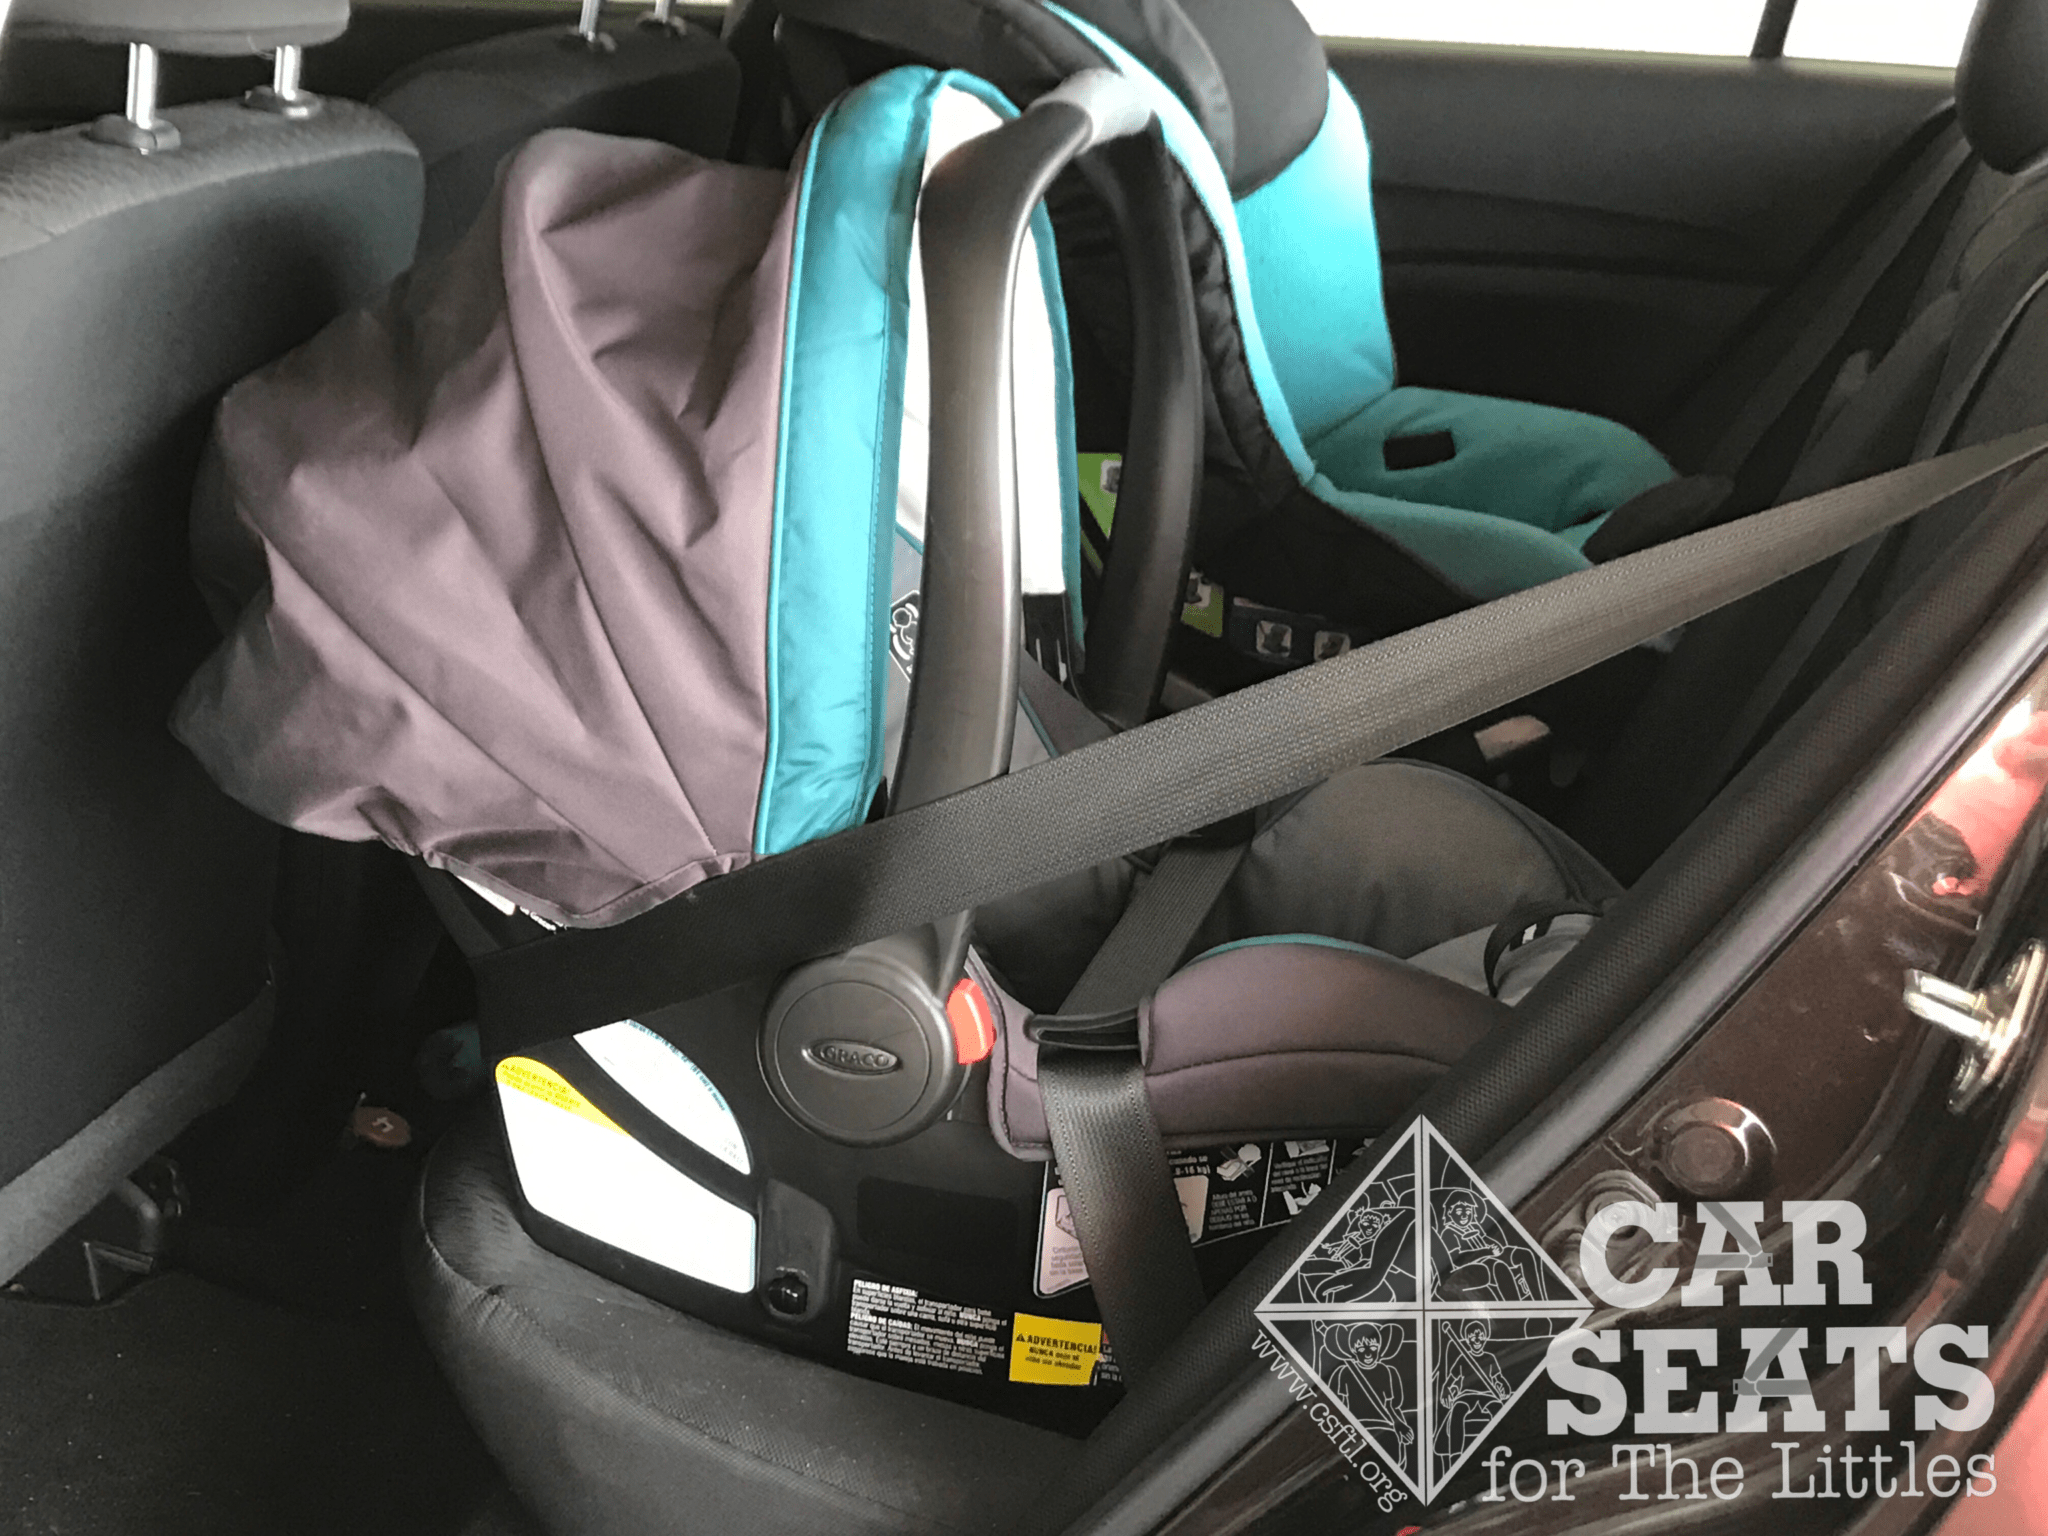 Graco Snugride Snuglock 35 Review Car Seats For The Littles - How To Install Graco Car Seat With Seatbelt